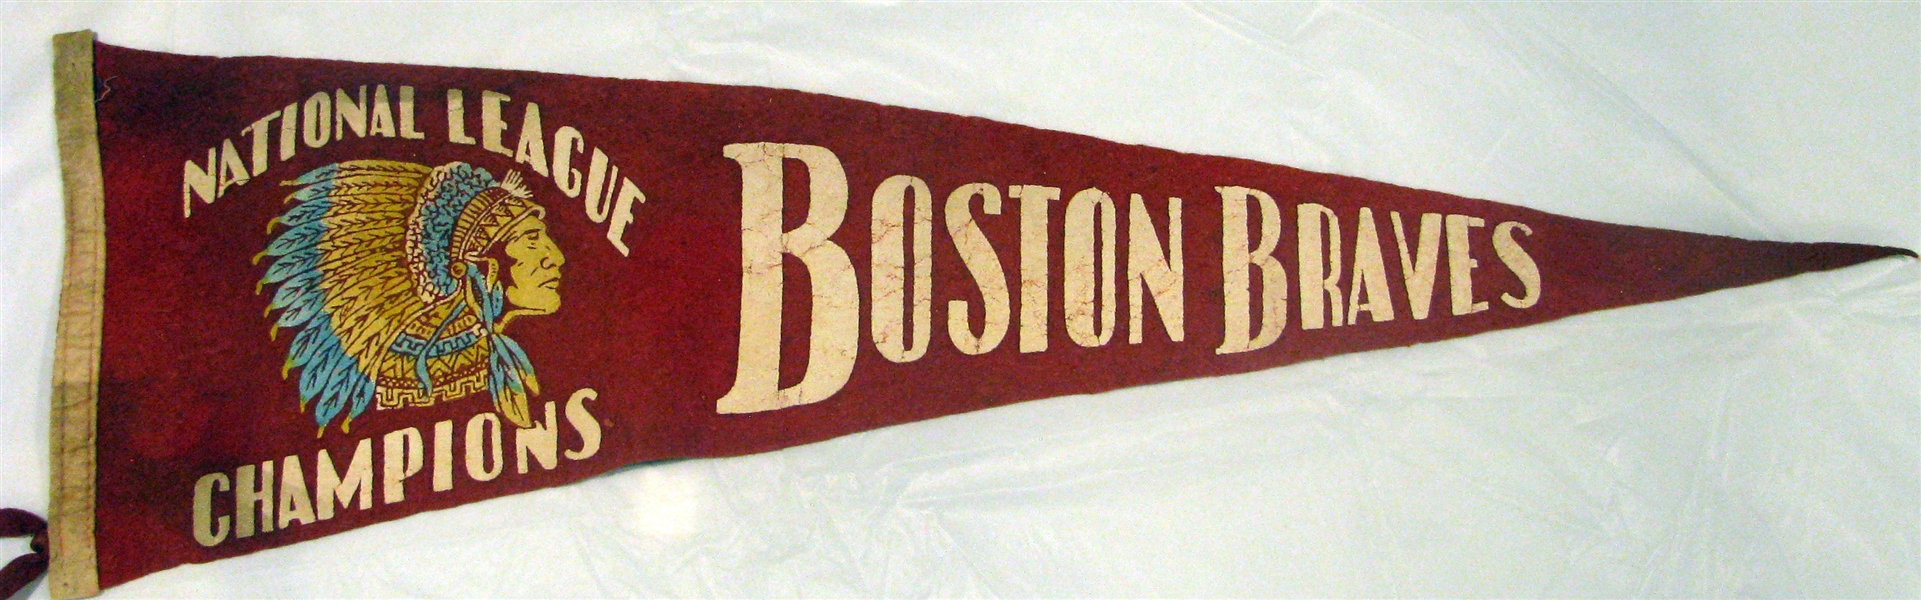 1948 BOSTON BRAVES NATIONAL LEAGUE CHAMPIONS 3/4 SIZED PENNANT